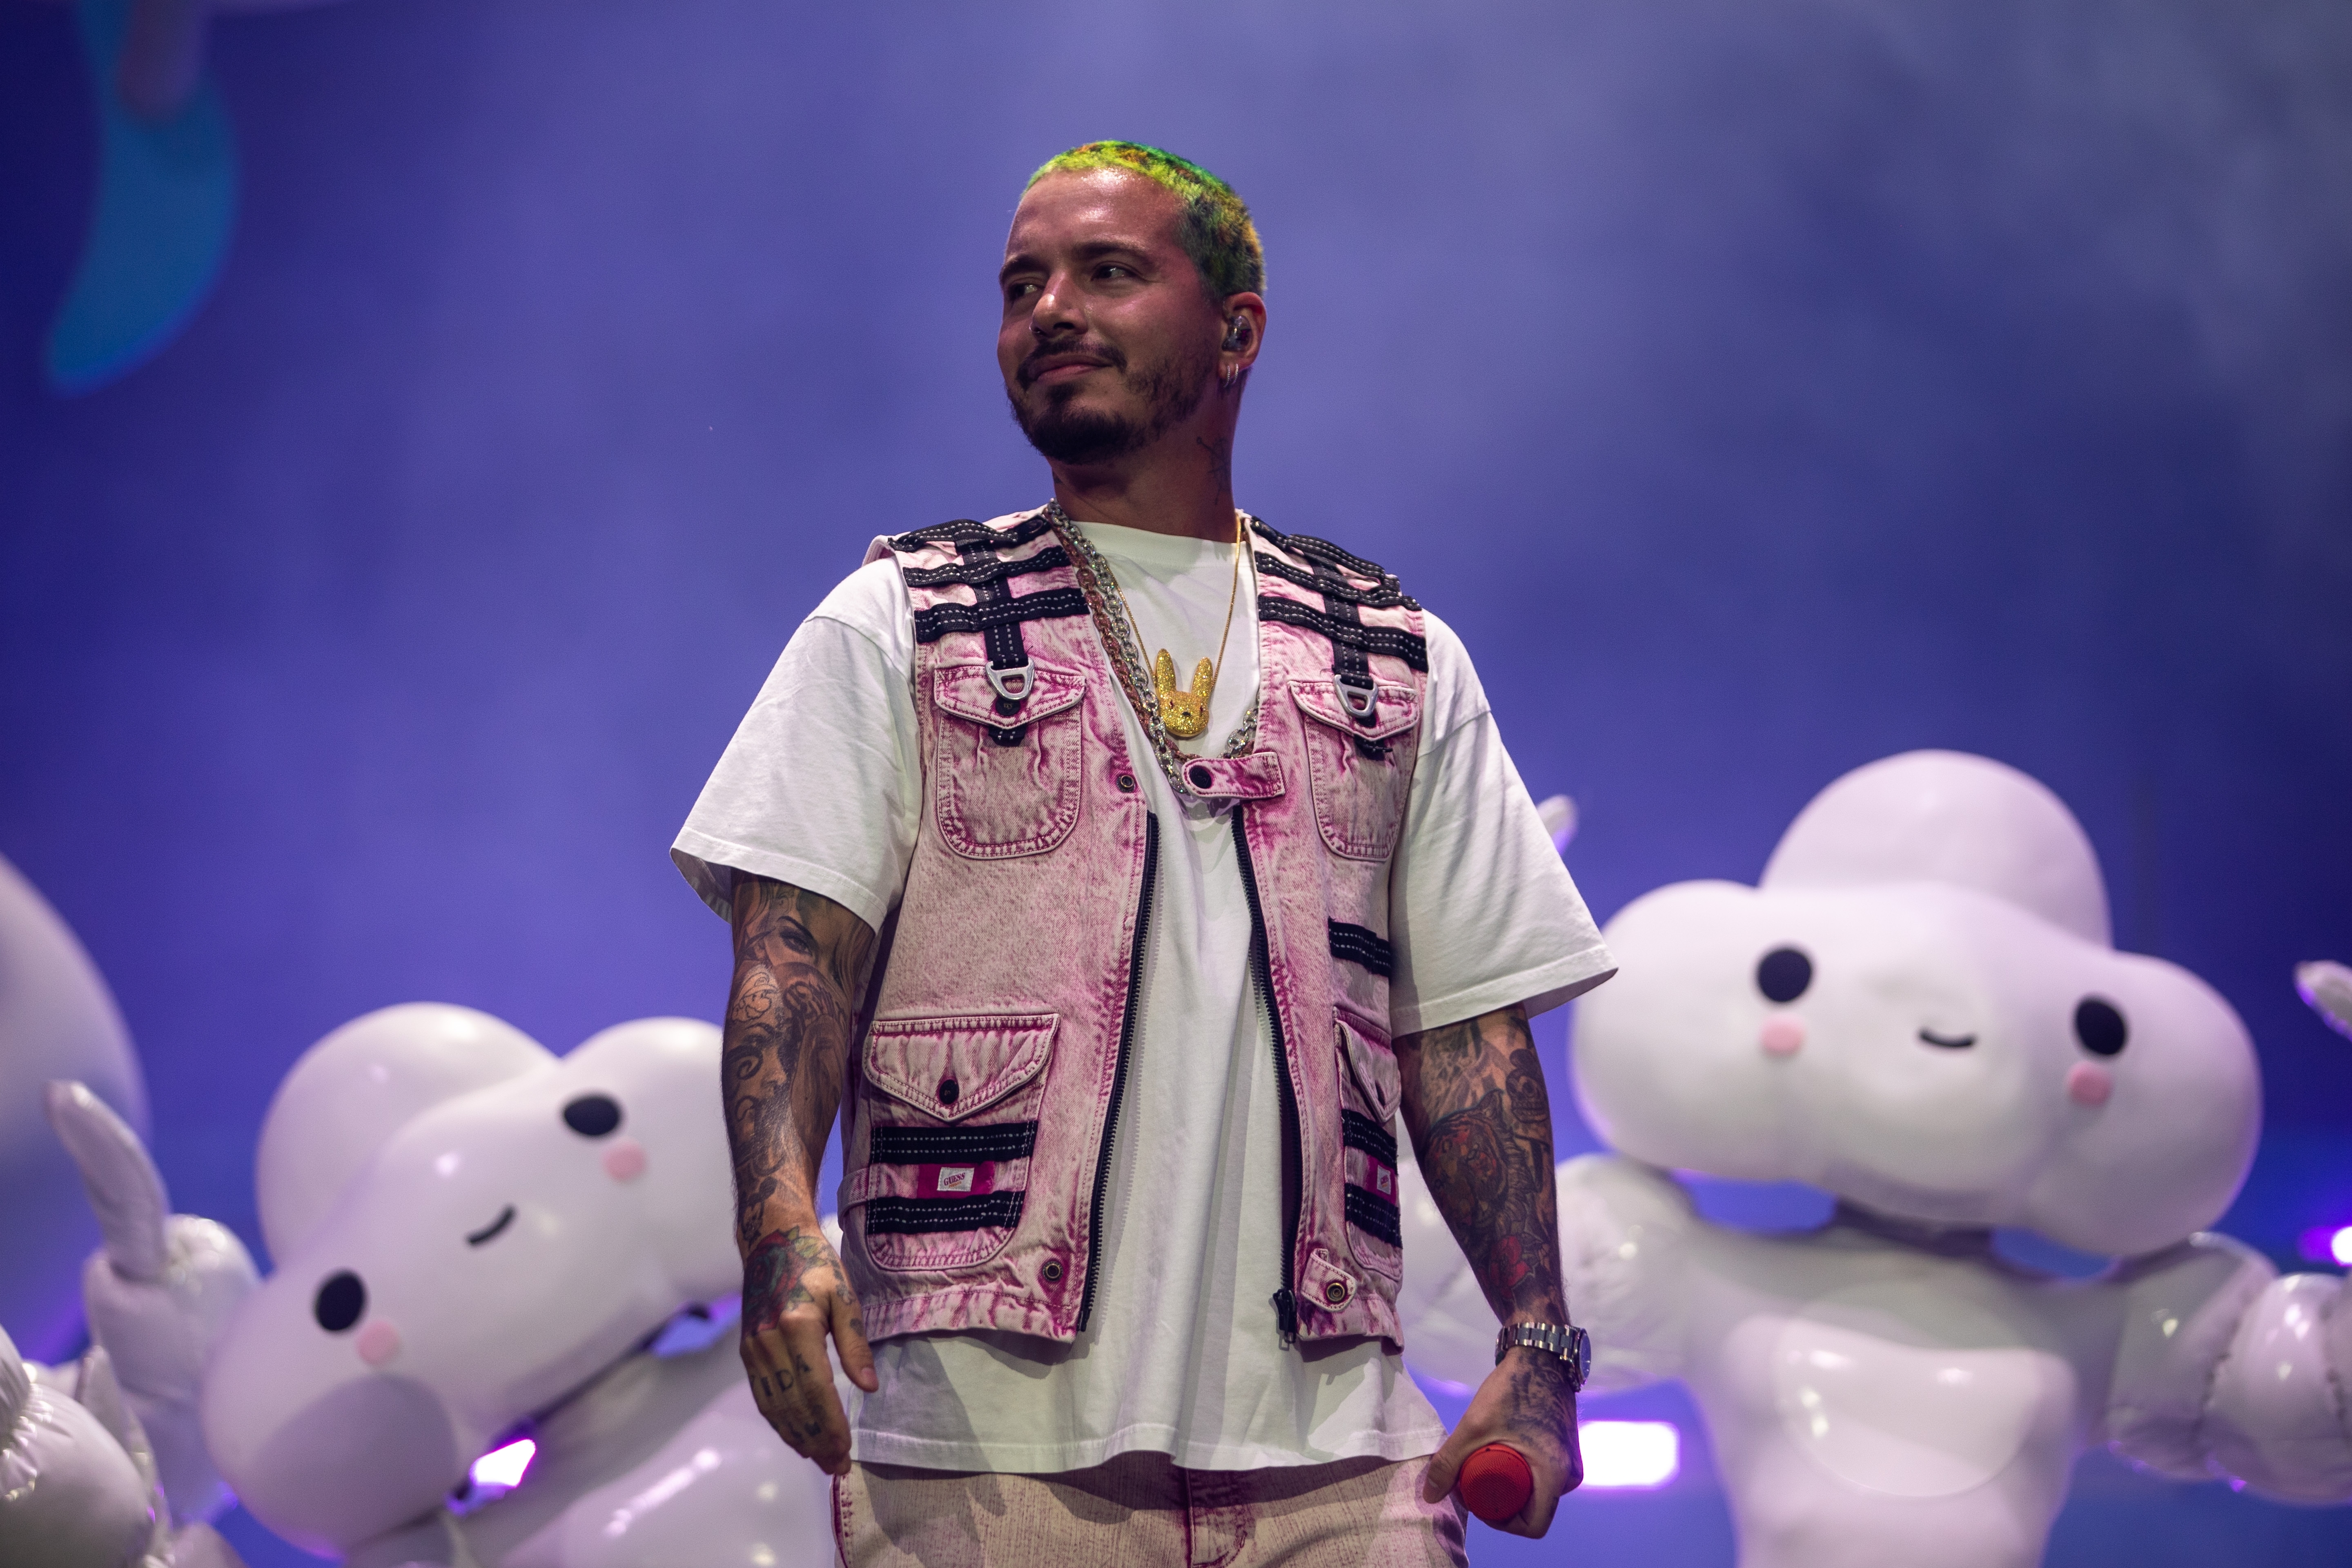 April 21, 2019 - Indio, California, United States: J Balvin performs on stage during Weekend 2 of the Coachella Valley Music and Arts Festival at the Empire Polo Club on Saturday, April 20, 2019 in Indio, Calif. (Kent Nishimura / Los Angeles Times/Polaris)